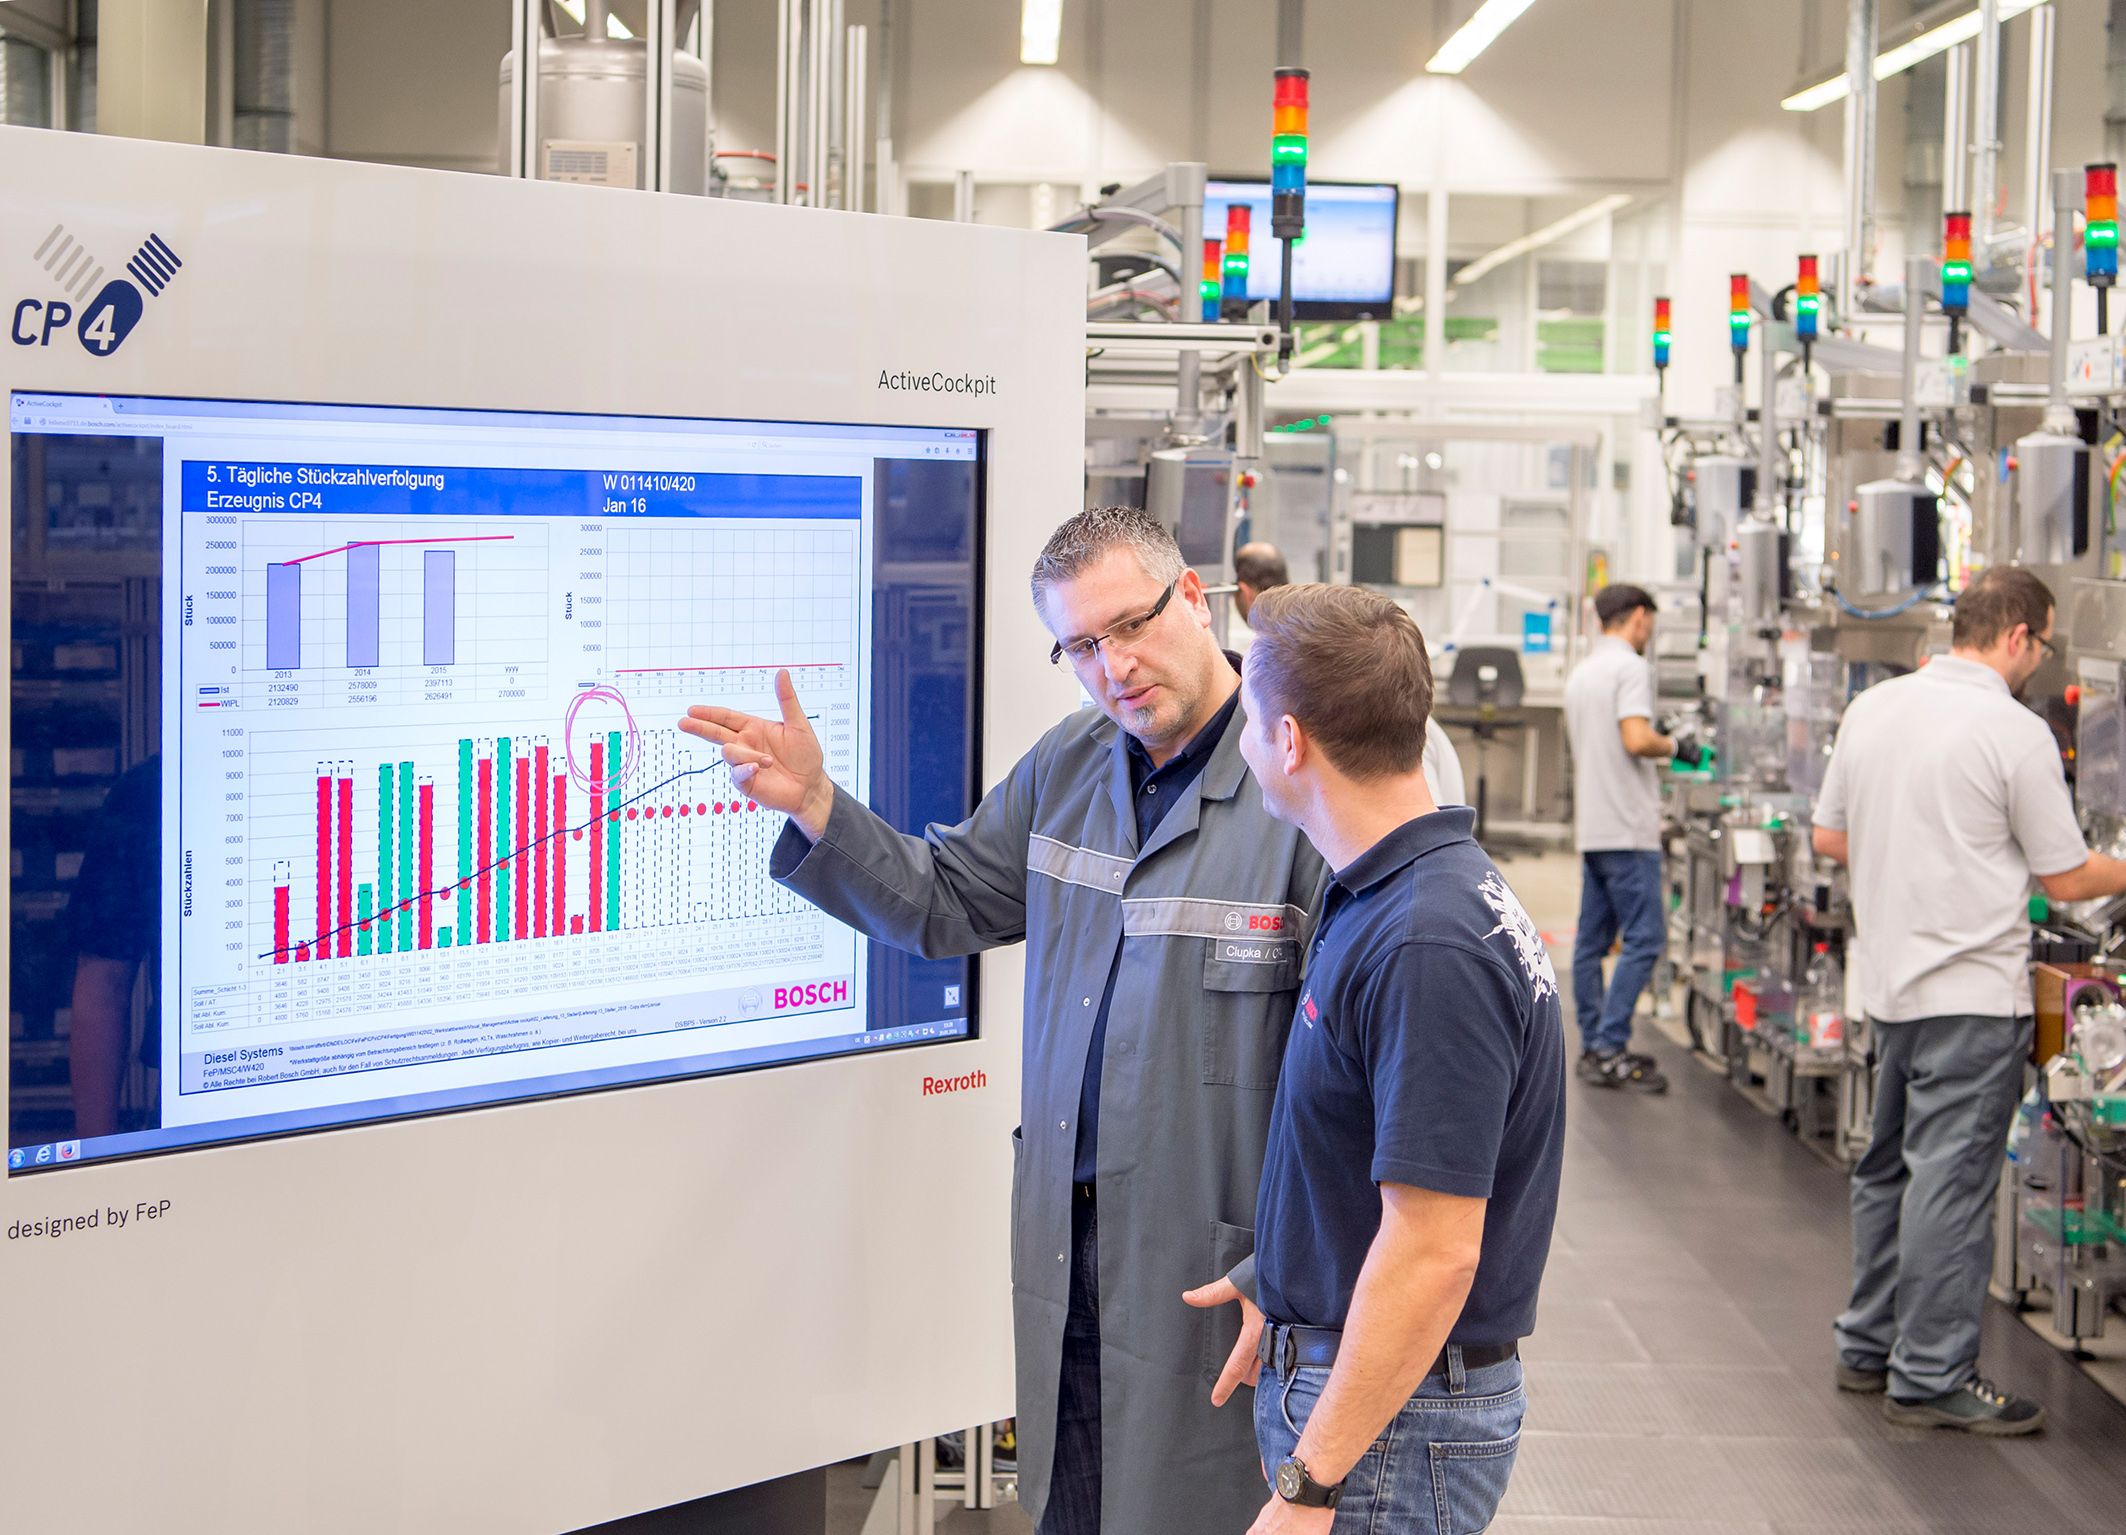 Bosch Combines Industrie 4 0 Platform And Indus Trial Internet Consortium Standards For The First Time Bosch Media Service Belgium